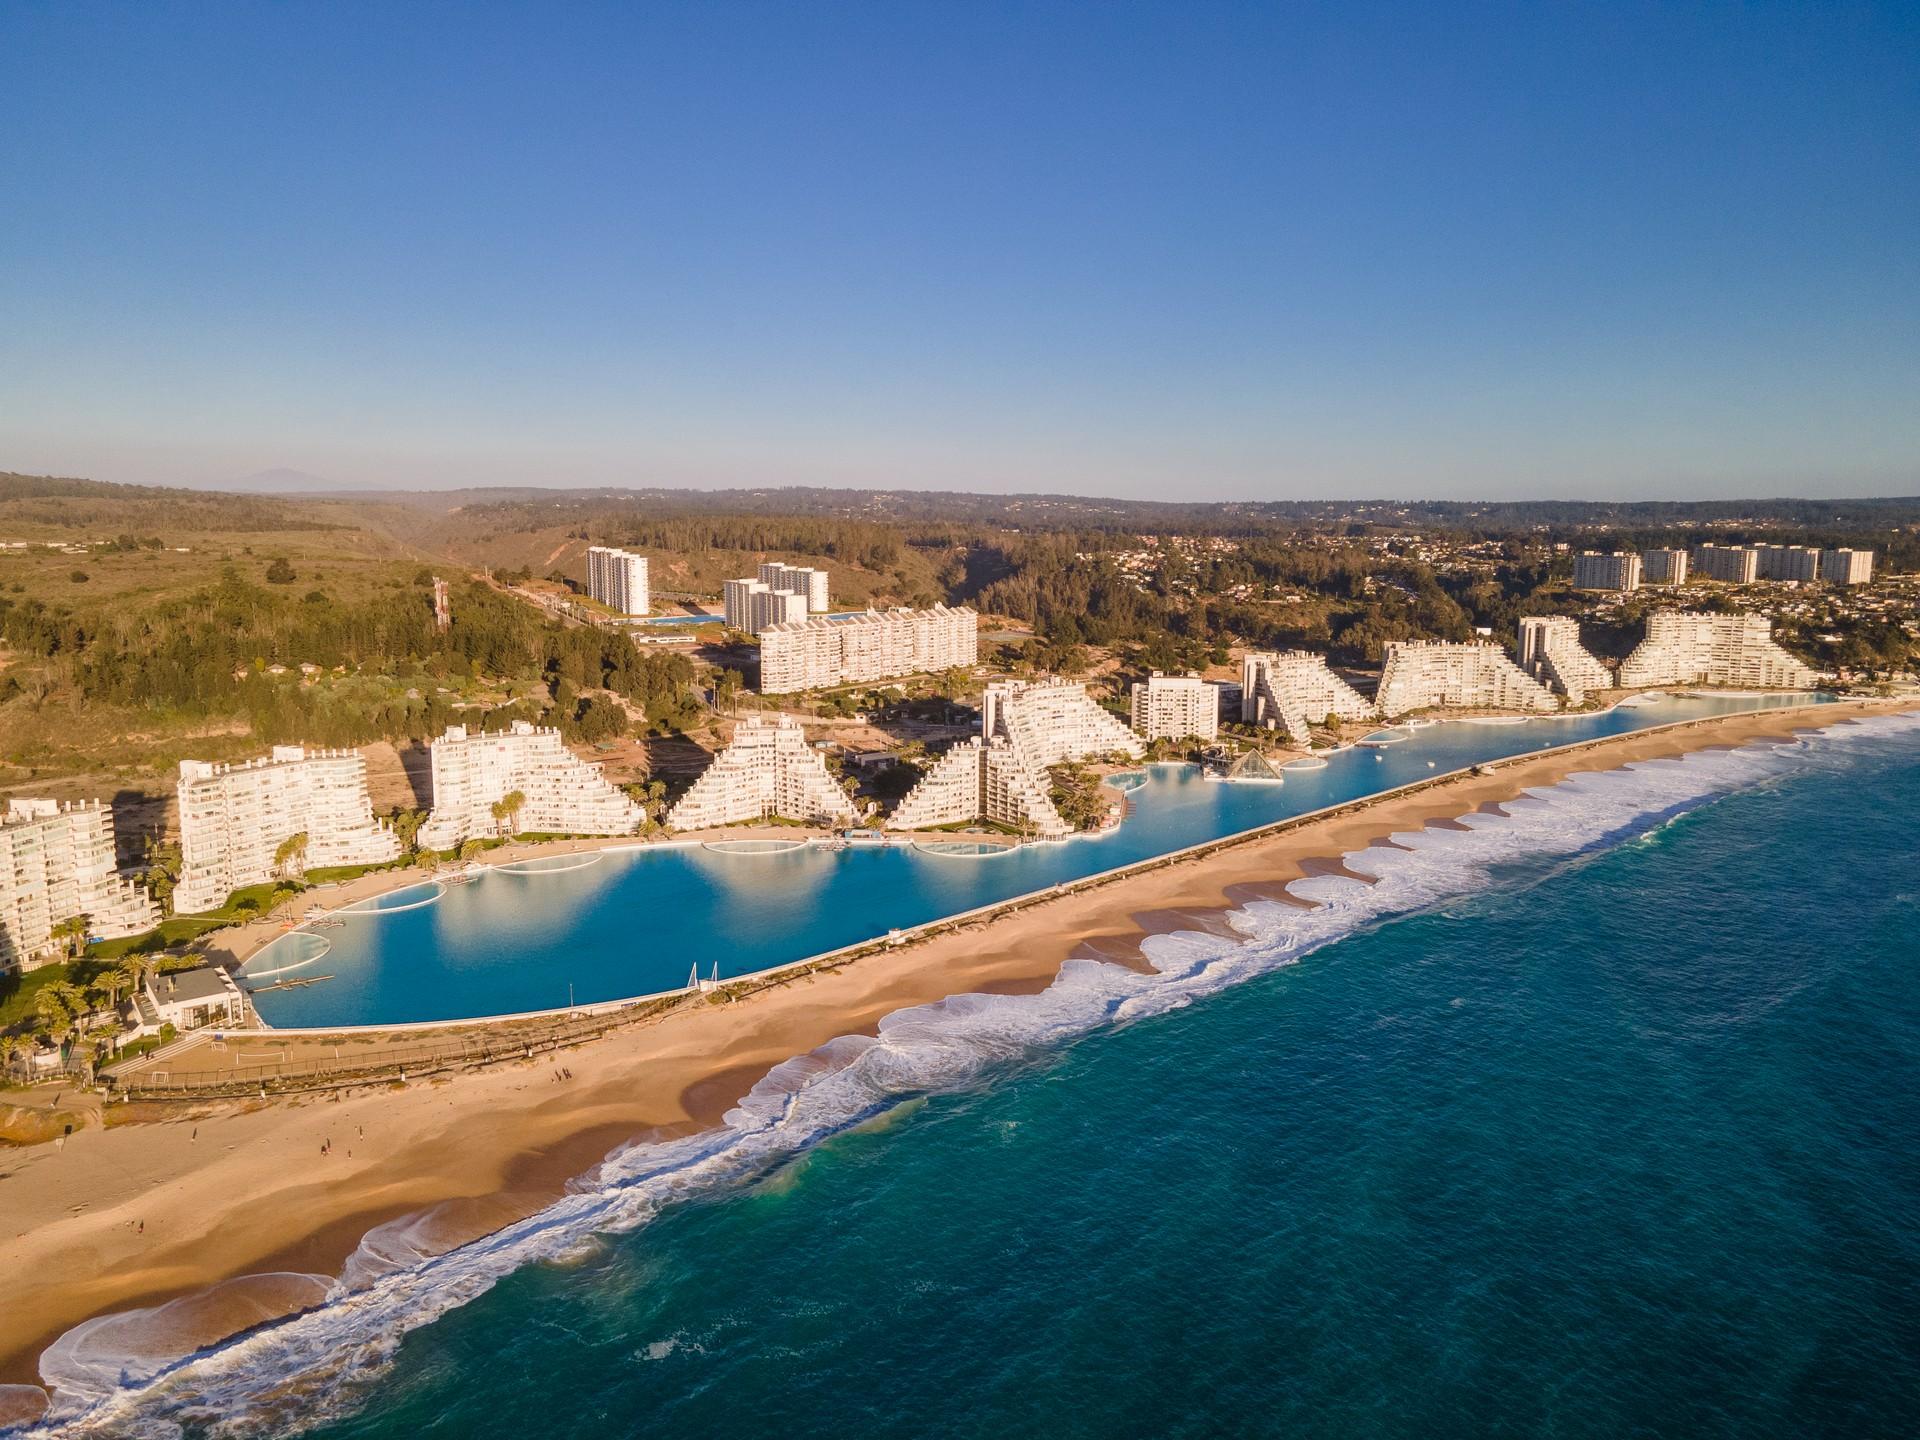 Aerial view of beach in Algarrobo on a clear sky day